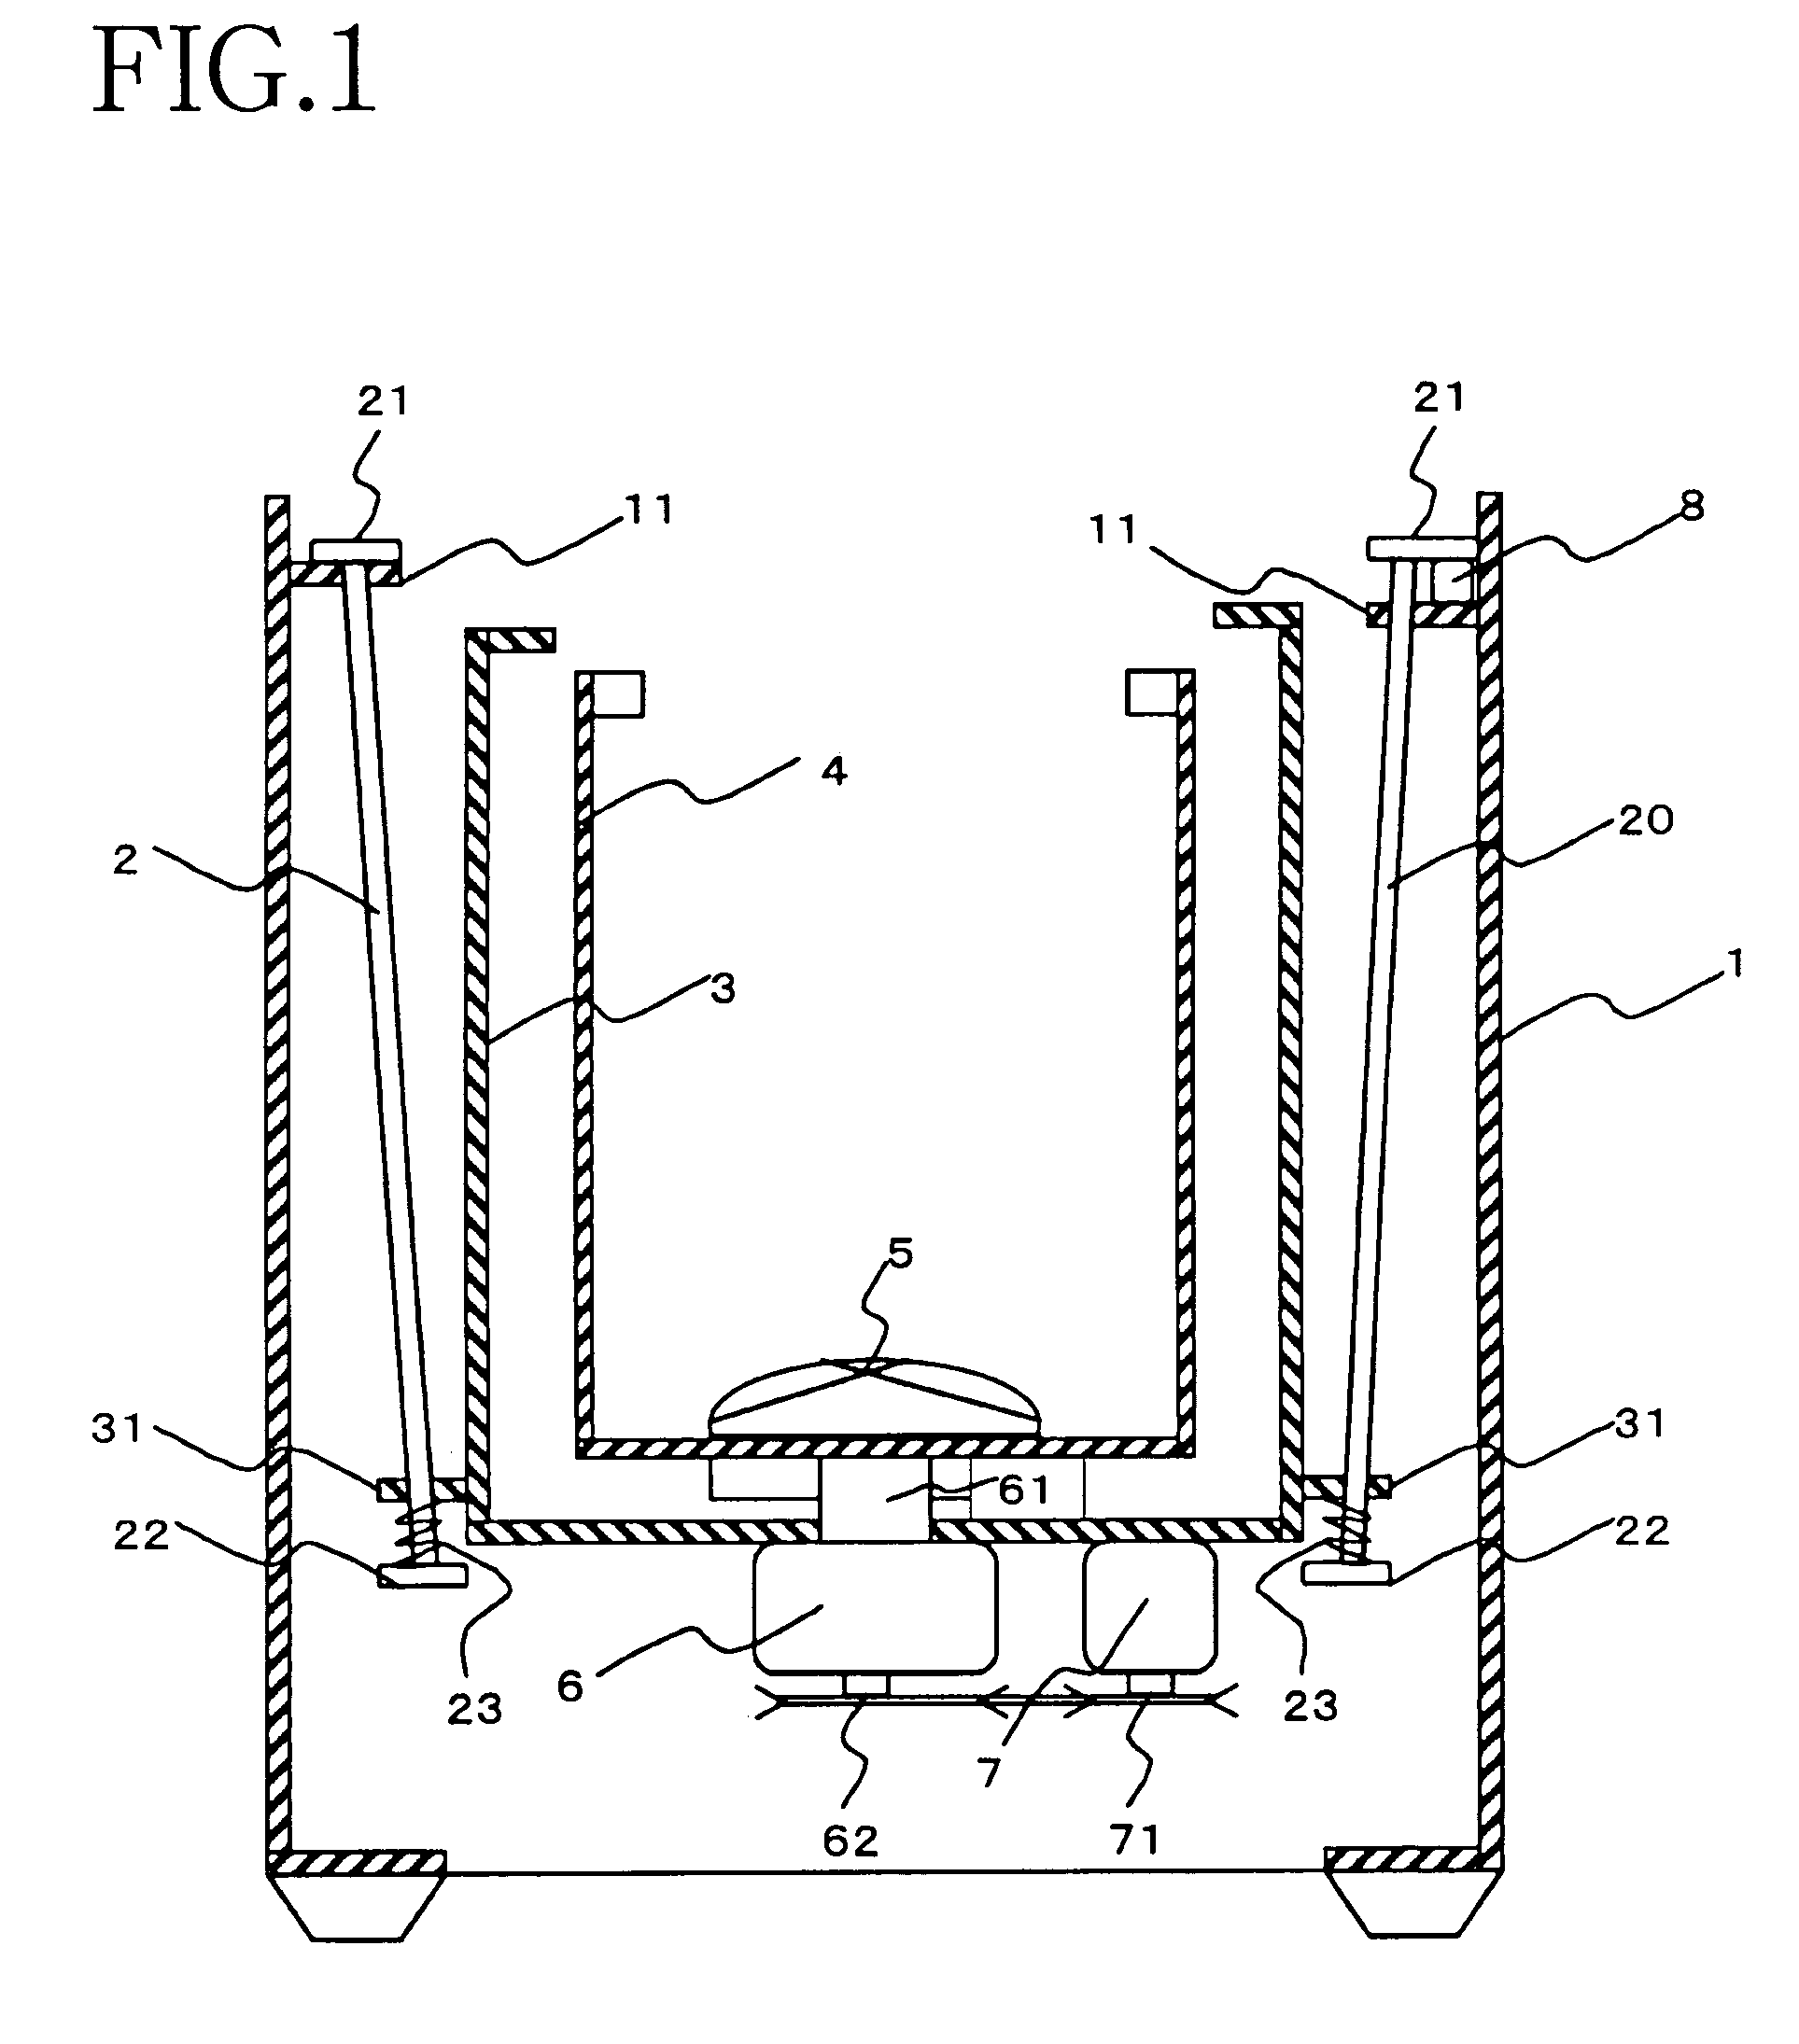 Load detecting system and automatic washing machine equipped with a system for detecting the magnitude of the load acting on a magnetostrictive element